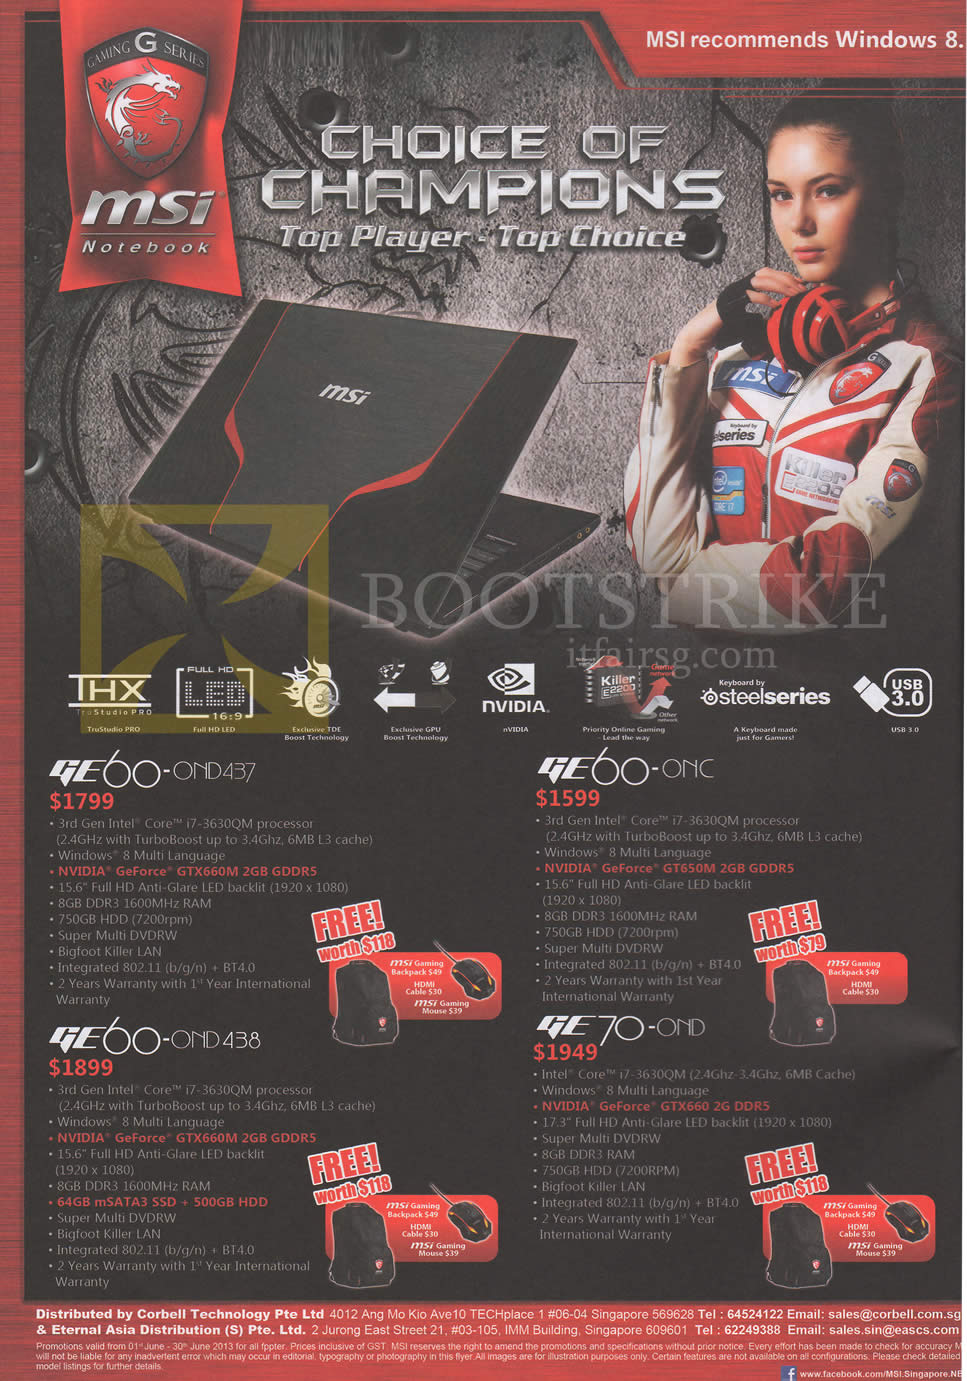 PC SHOW 2013 price list image brochure of MSI Notebooks GE60-0ND437, GE60-0NC, GE60-0ND438, GE70-0ND